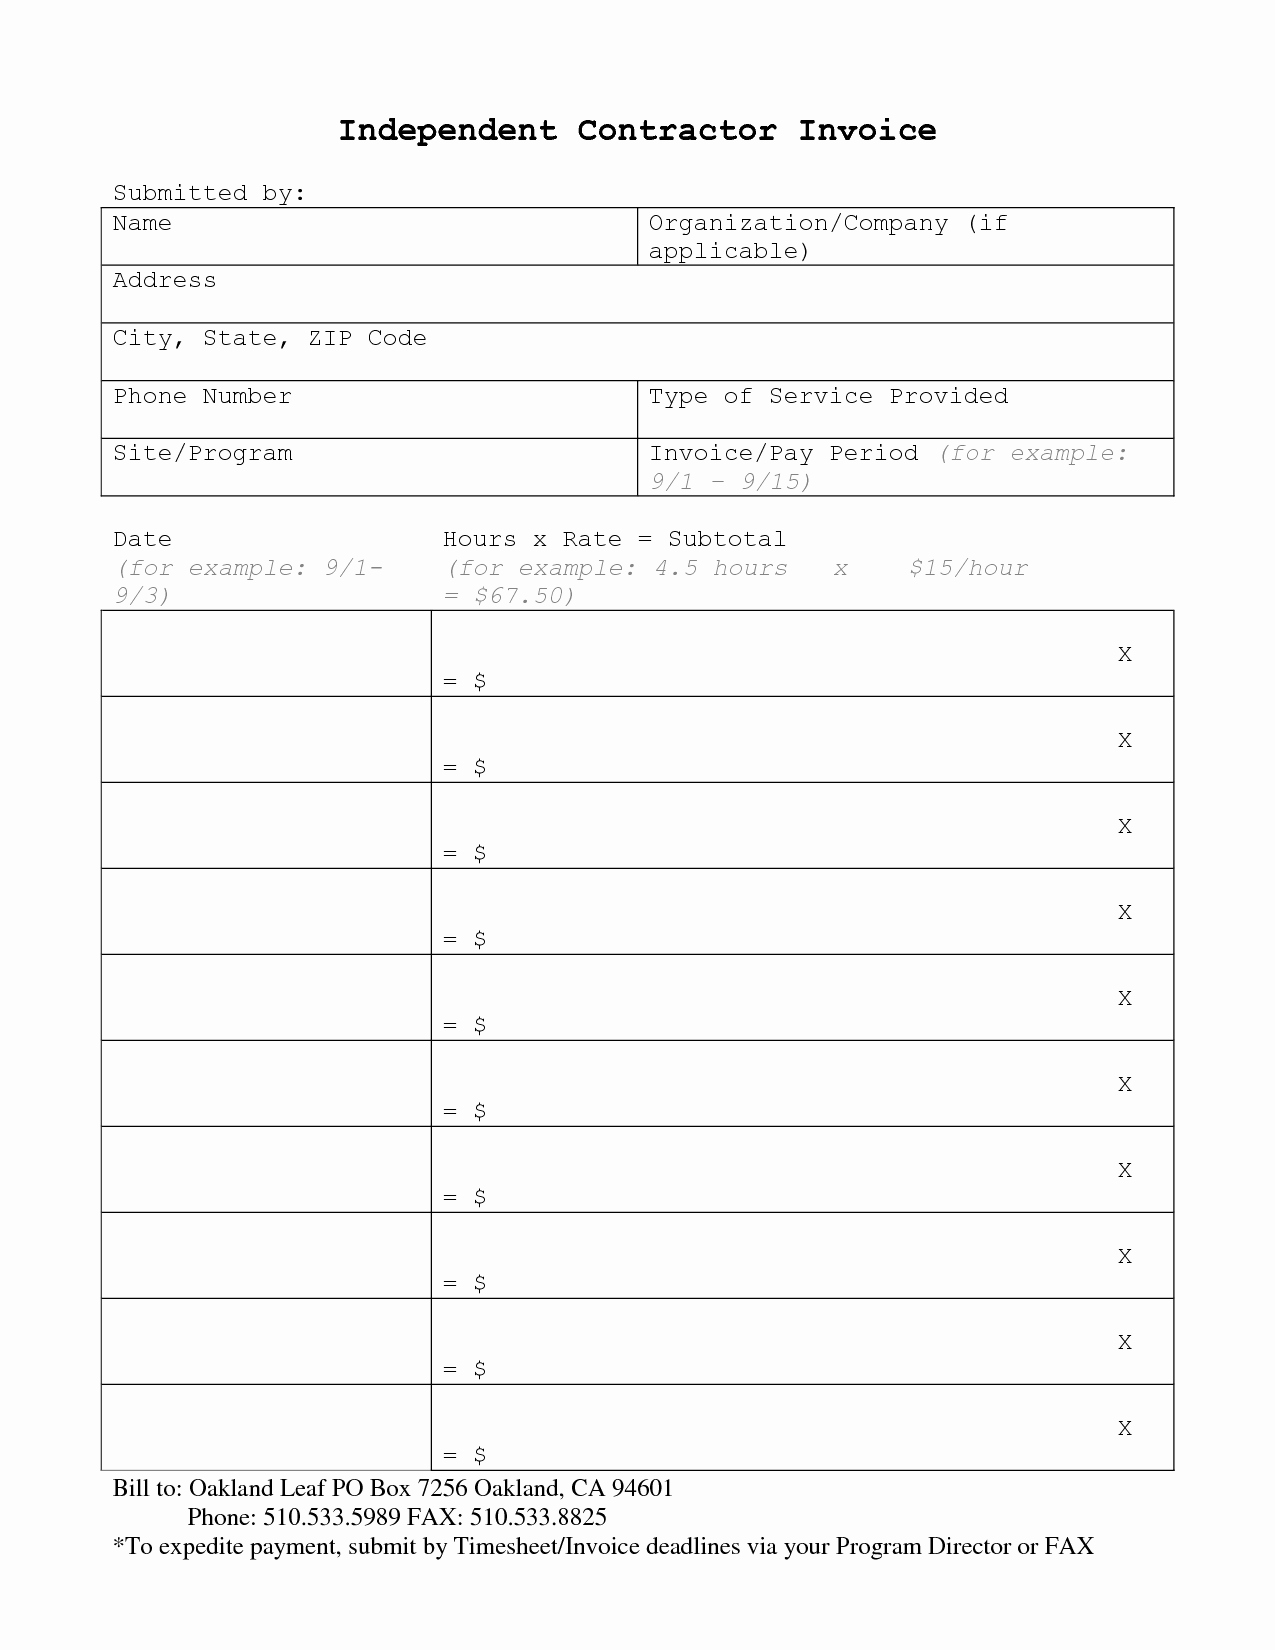 Independent Contractor Invoice Template Free Elegant Independent Contractor Invoice Template